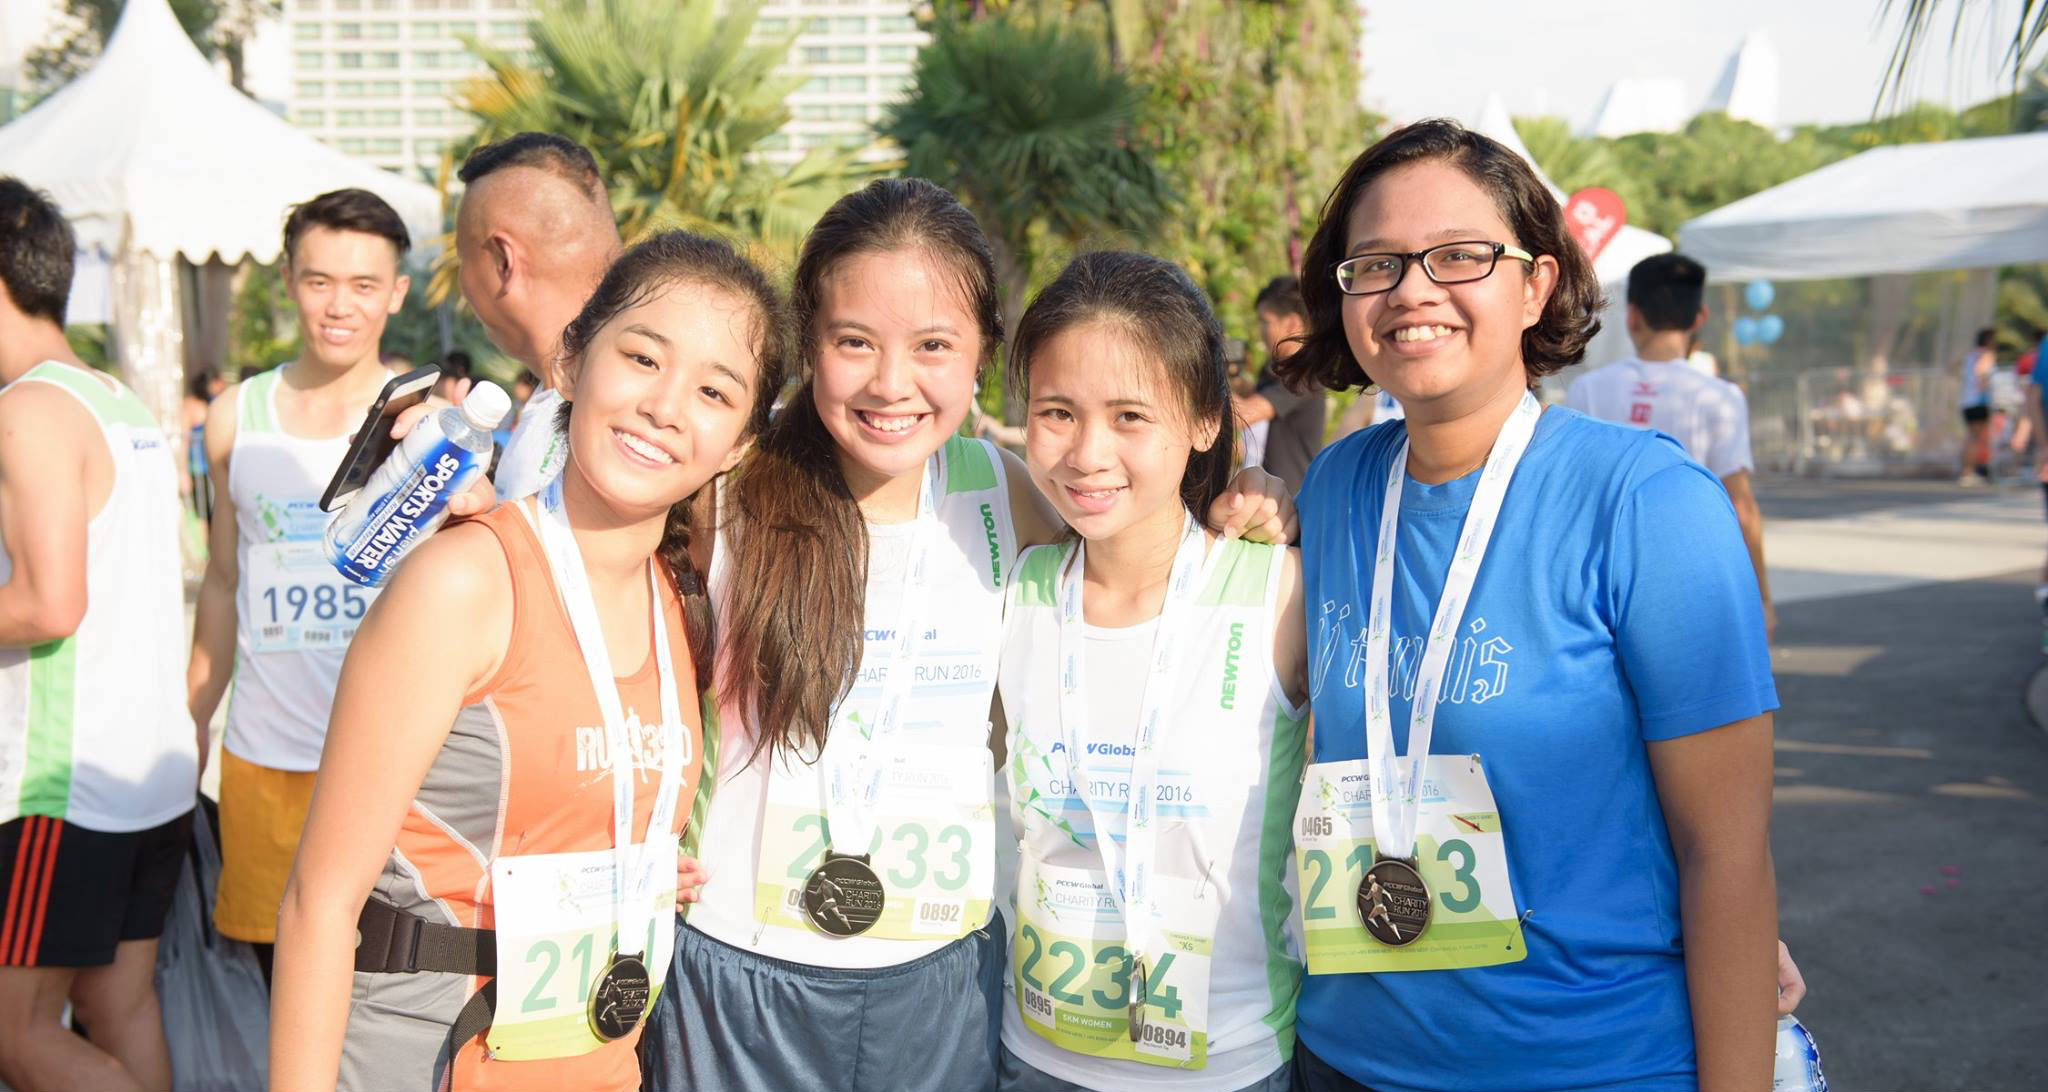 How You as a Runner Can Help to Grant the Wishes of Children with Life-Threatening Illnesses